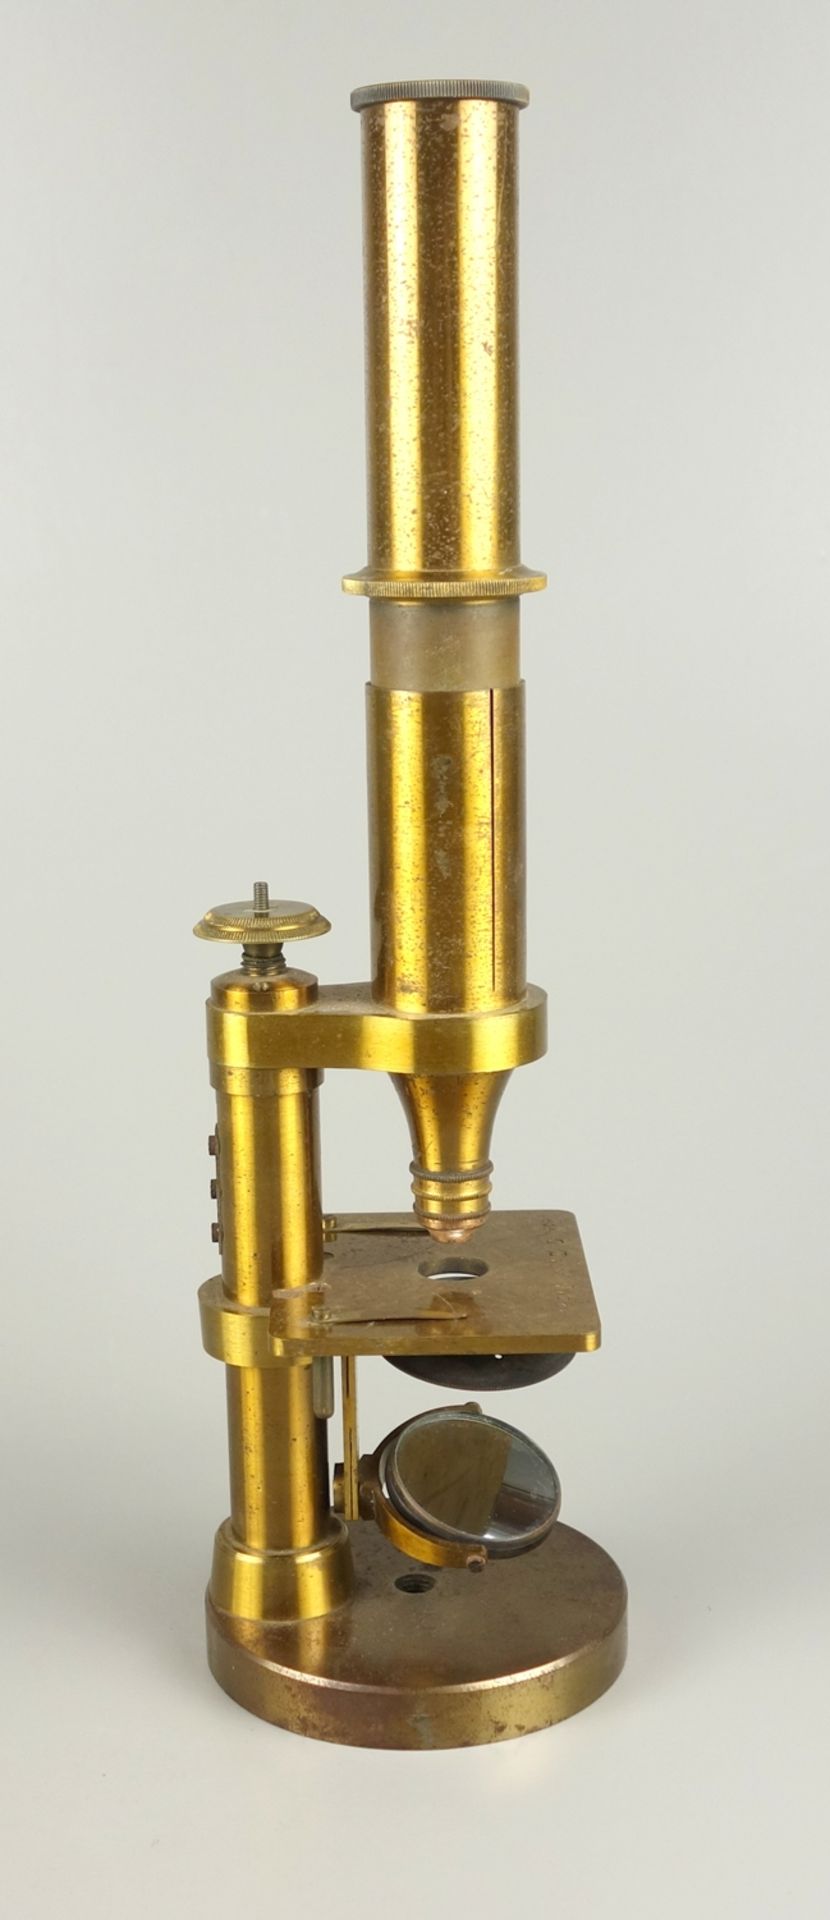 Very early Carl Zeiss microscope, No.191., Jena, probably 1860s